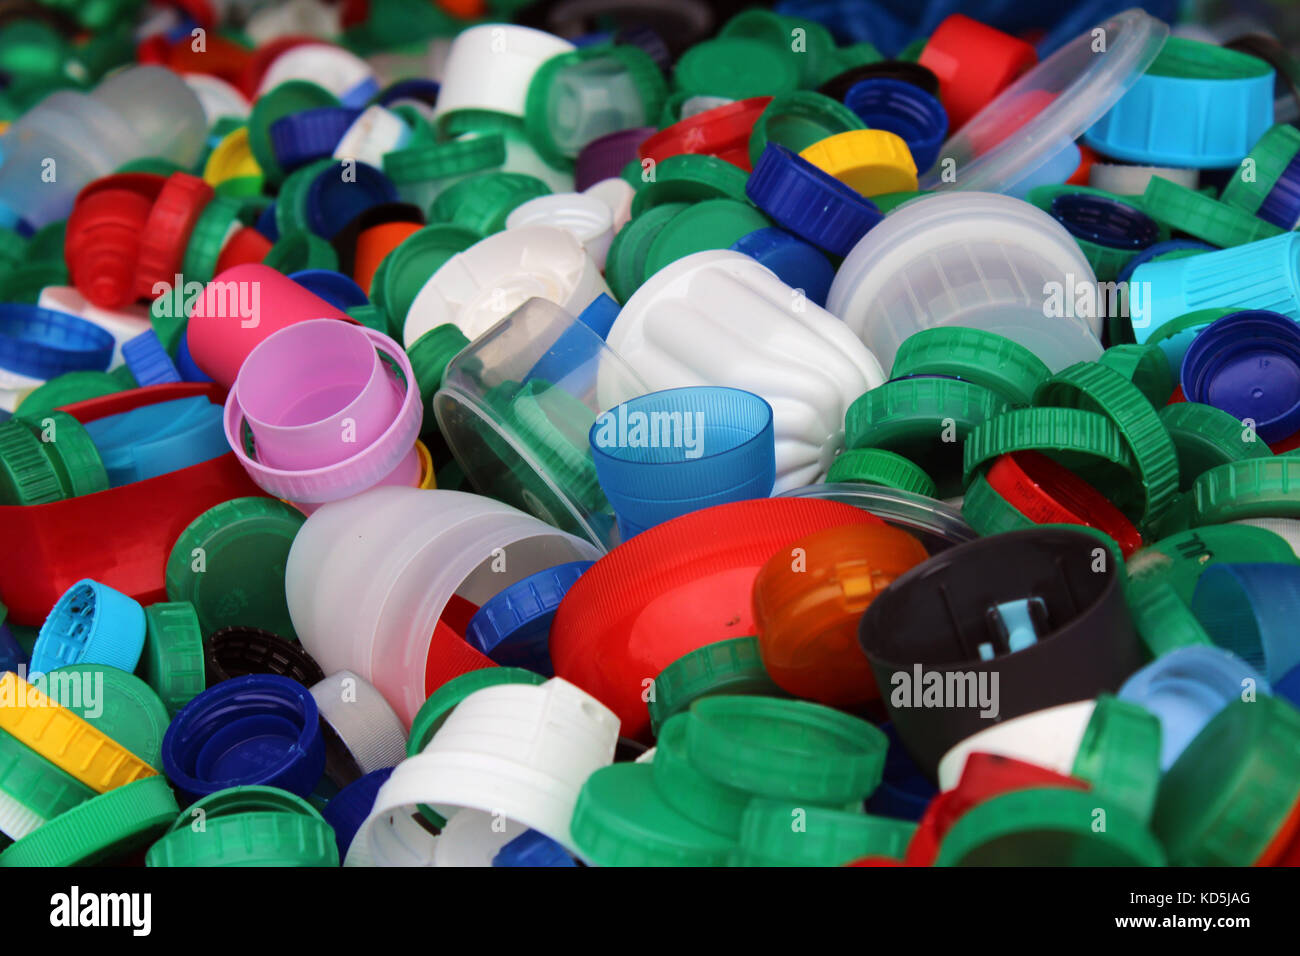 Plenty of colorful plastic bottles tops ready to be recycled (save the environment from plastic and recycle reuse go green themes) Stock Photo